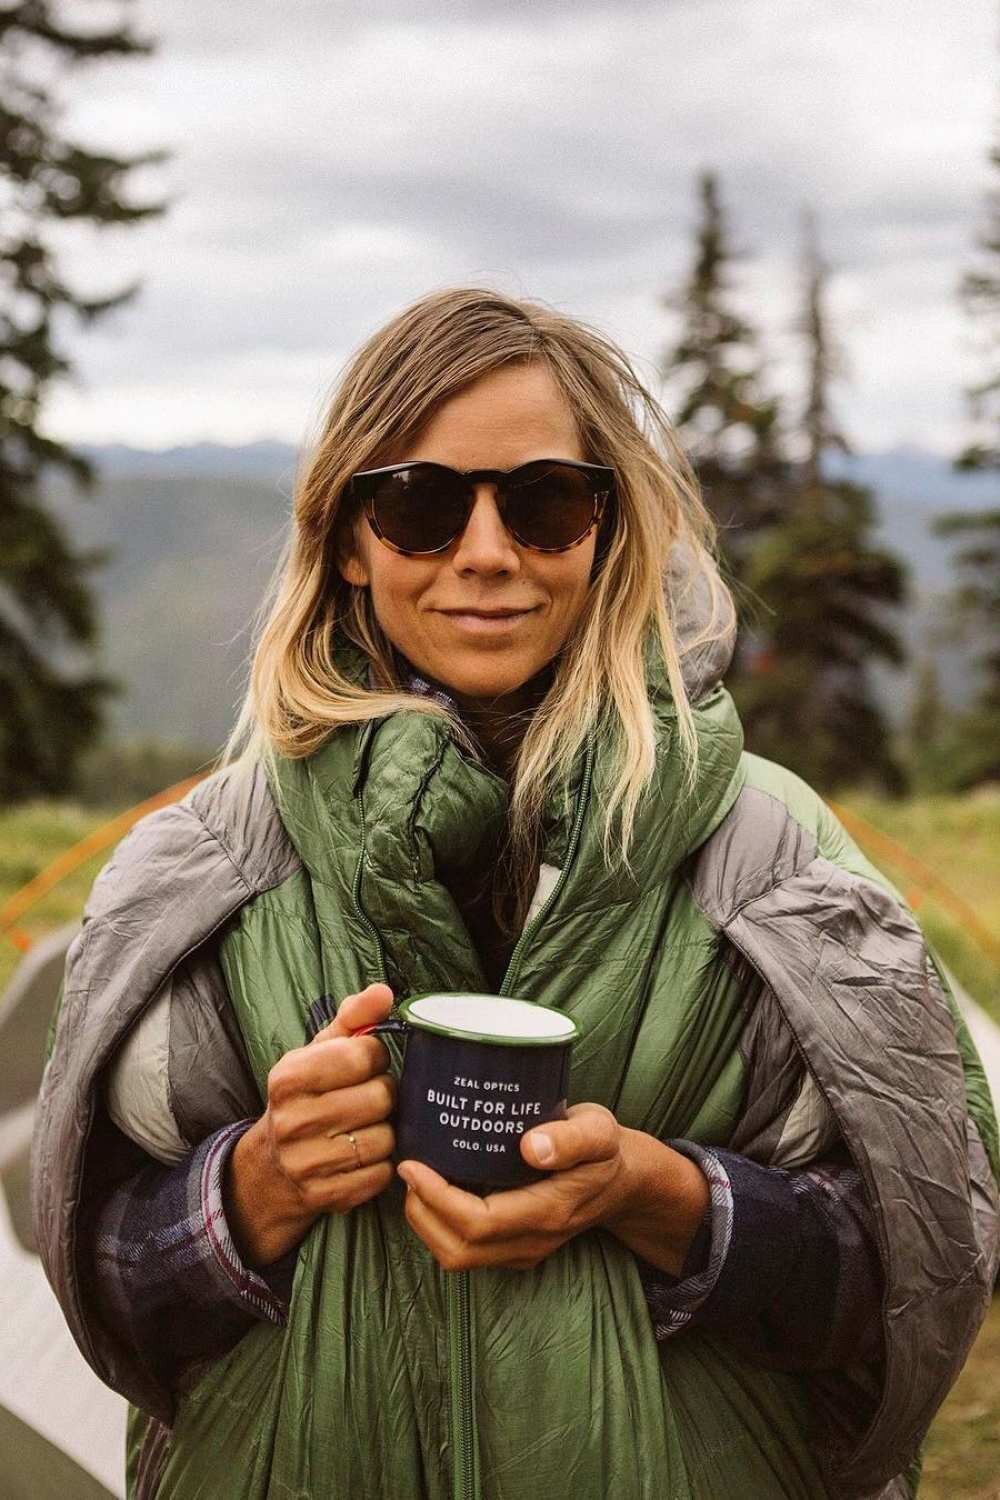 Eco-Friendly Outdoor Clothing for Green Adventures - Cool of the Wild